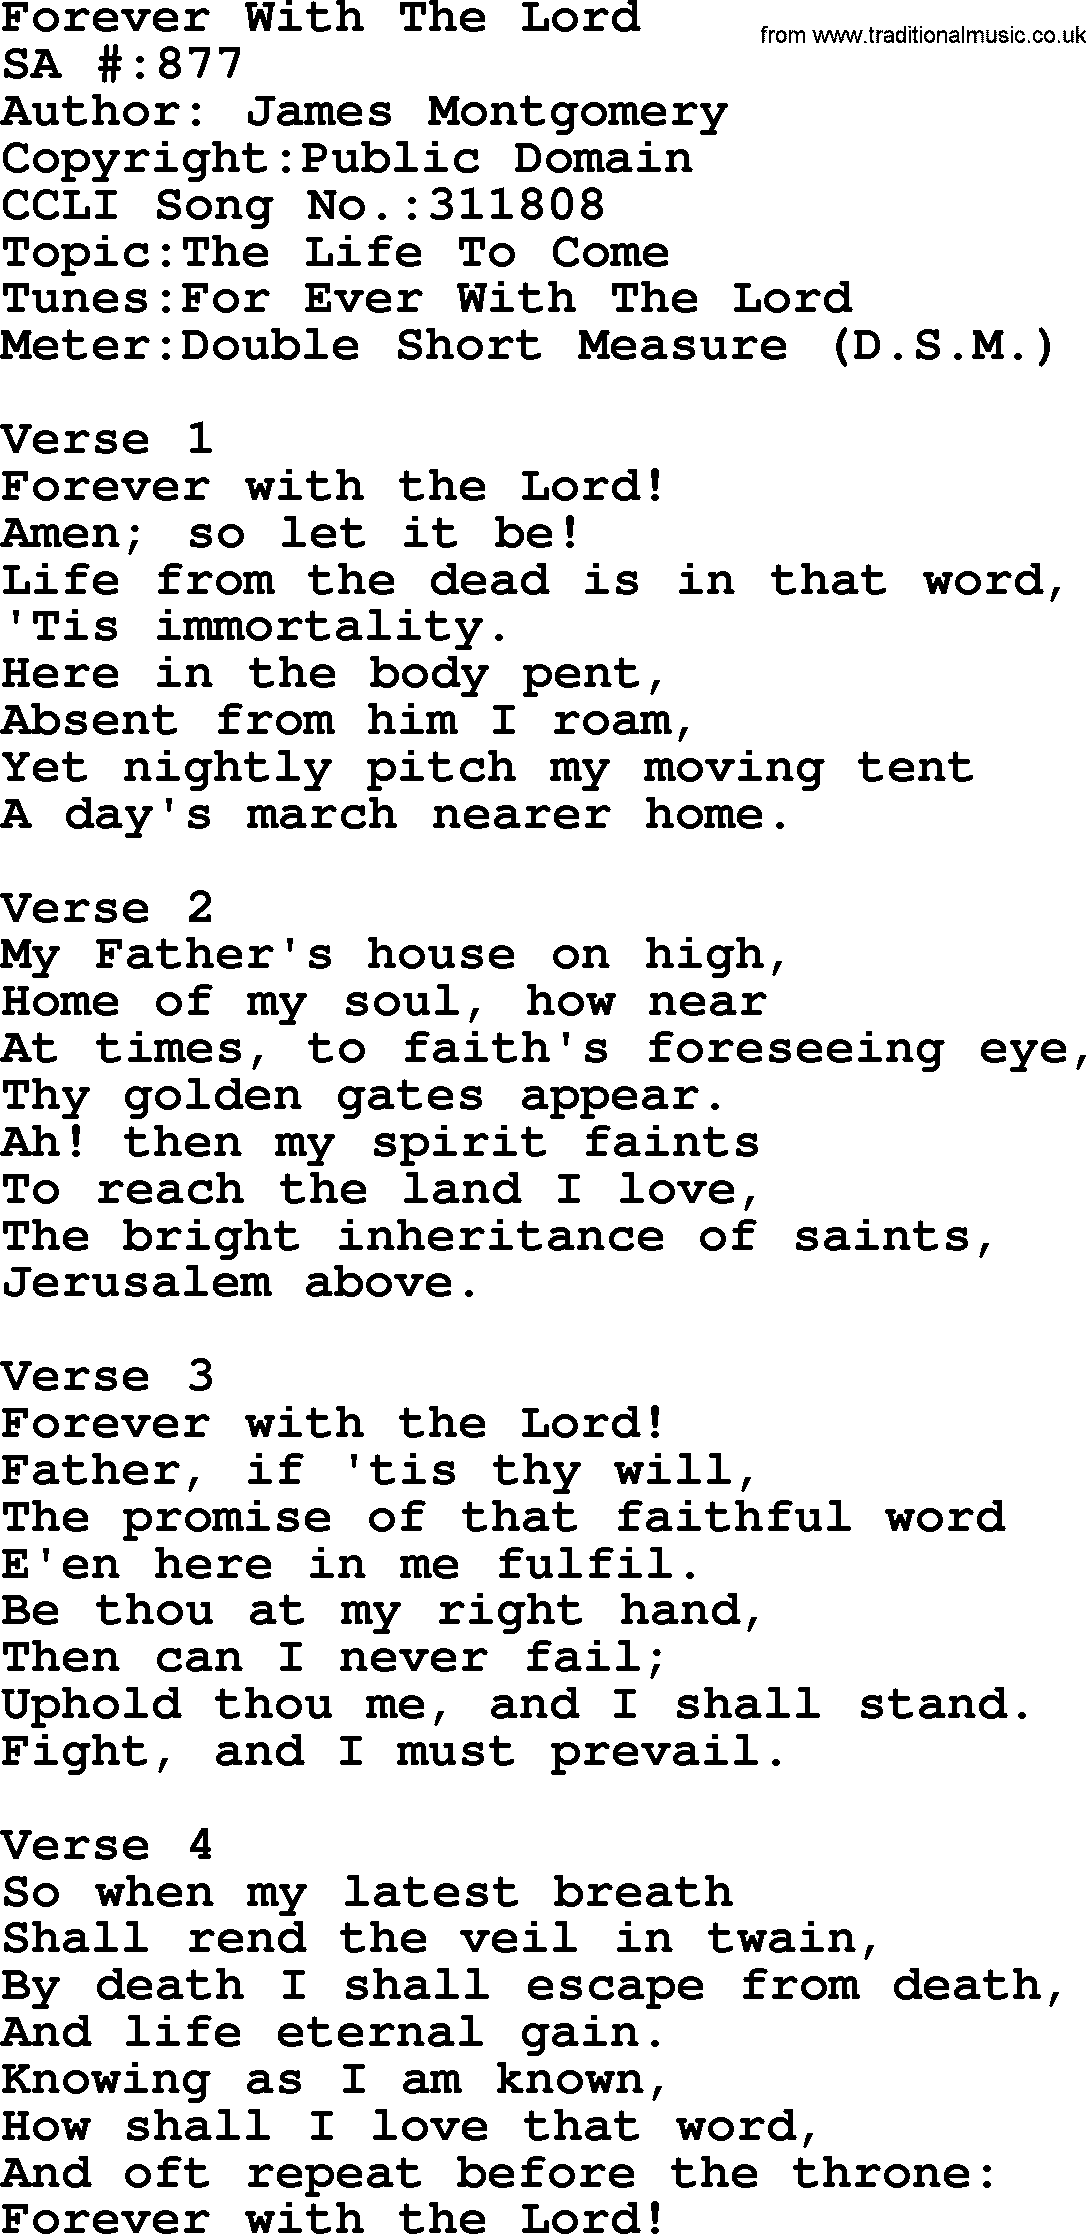 Salvation Army Hymnal, title: Forever With The Lord, with lyrics and PDF,